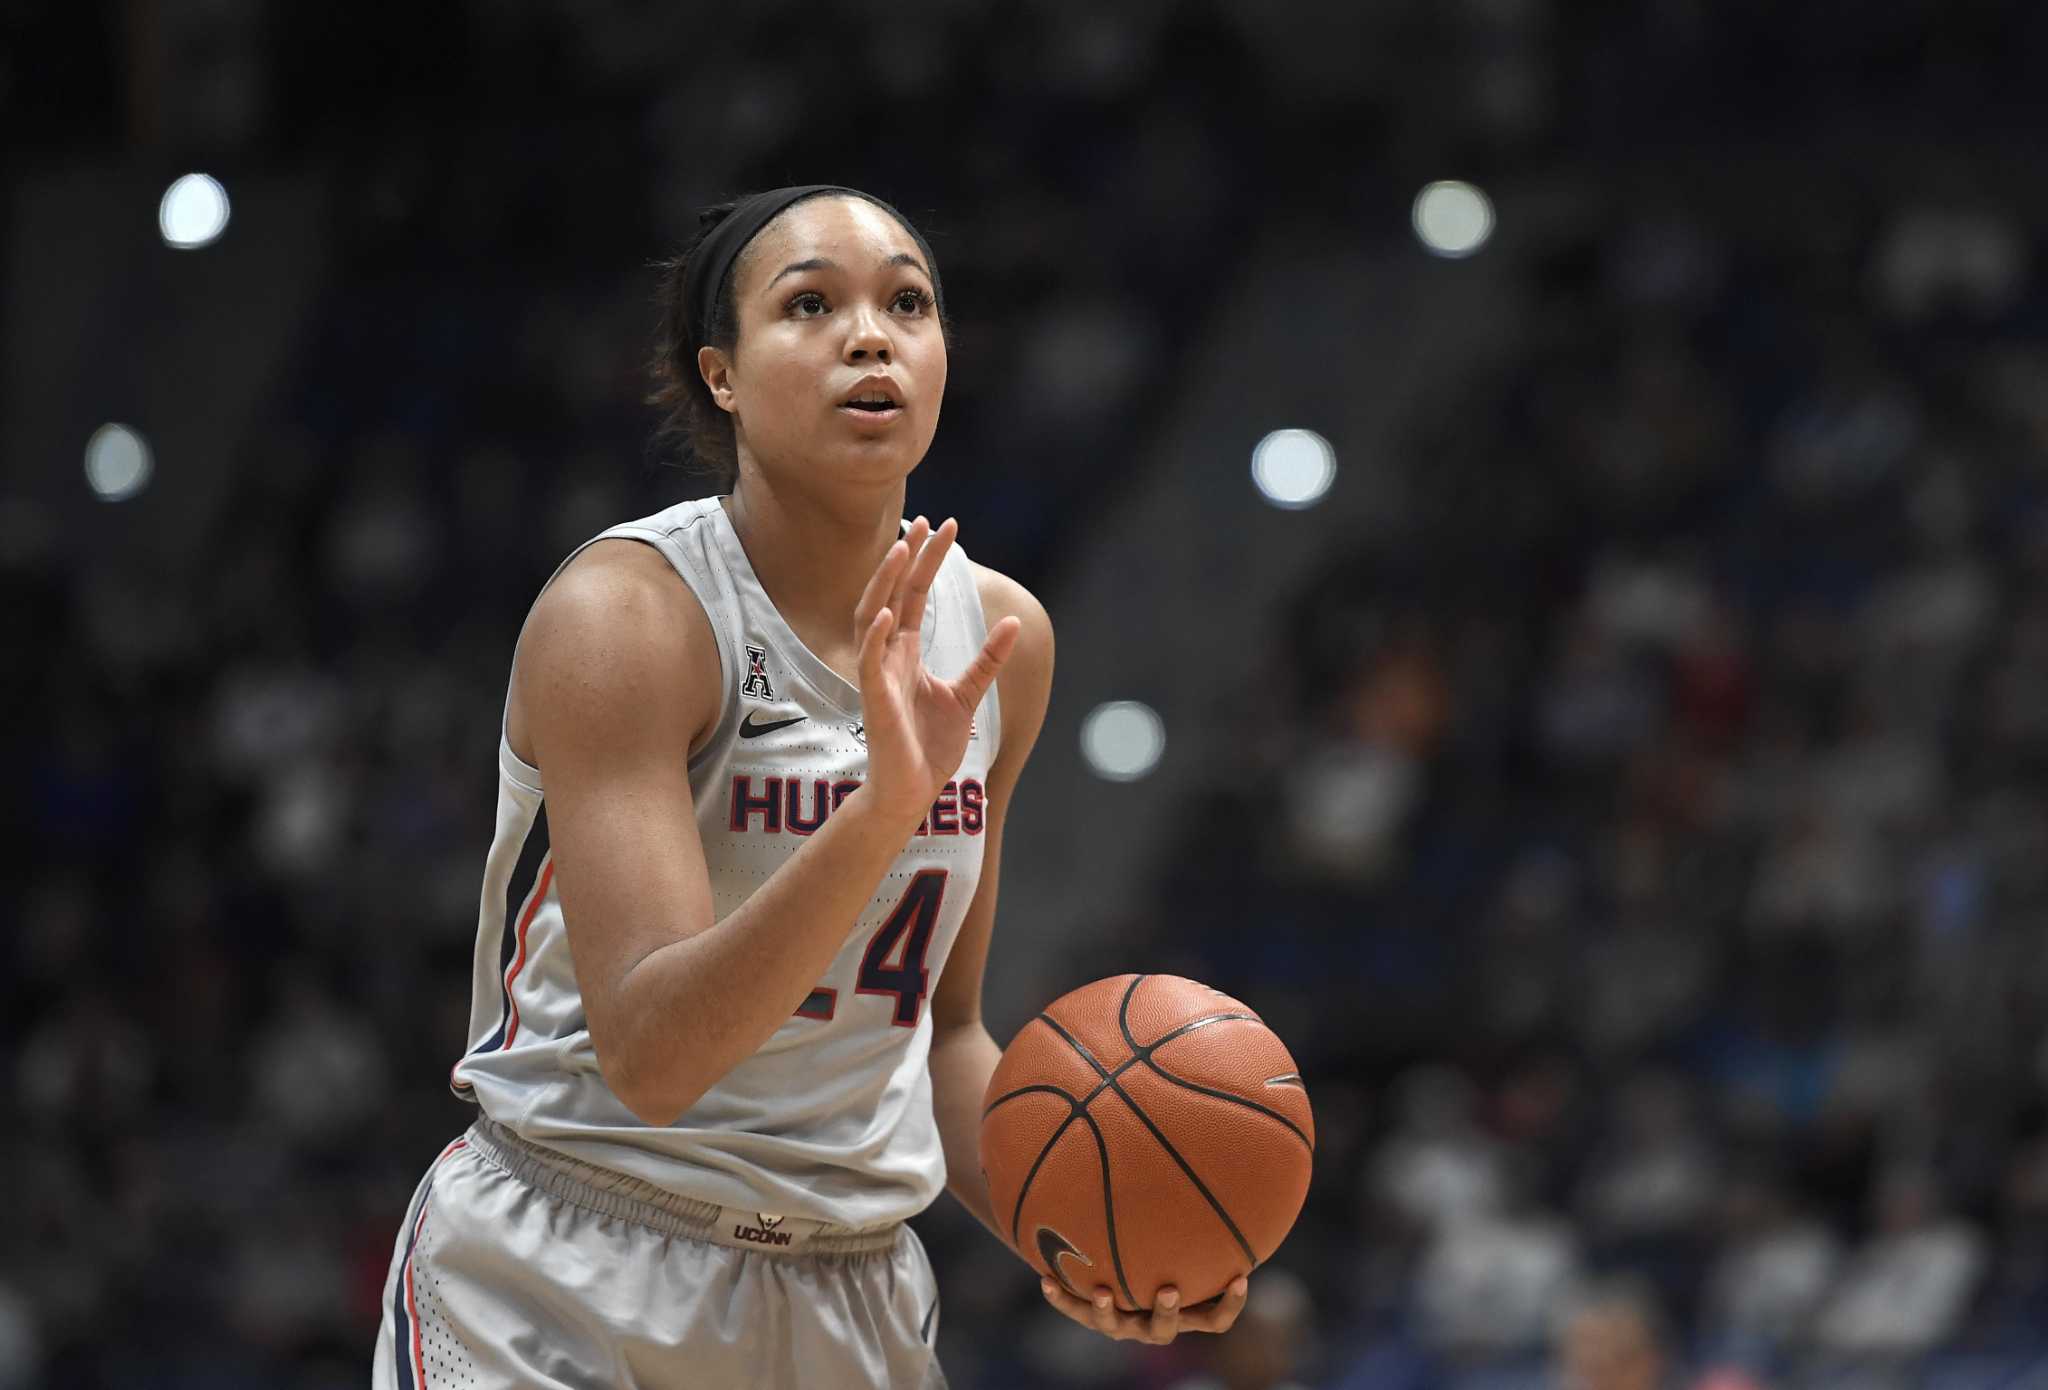 Women’s basketball gameday: No. 2 UConn at No. 3 Louisville - Connecticut Post